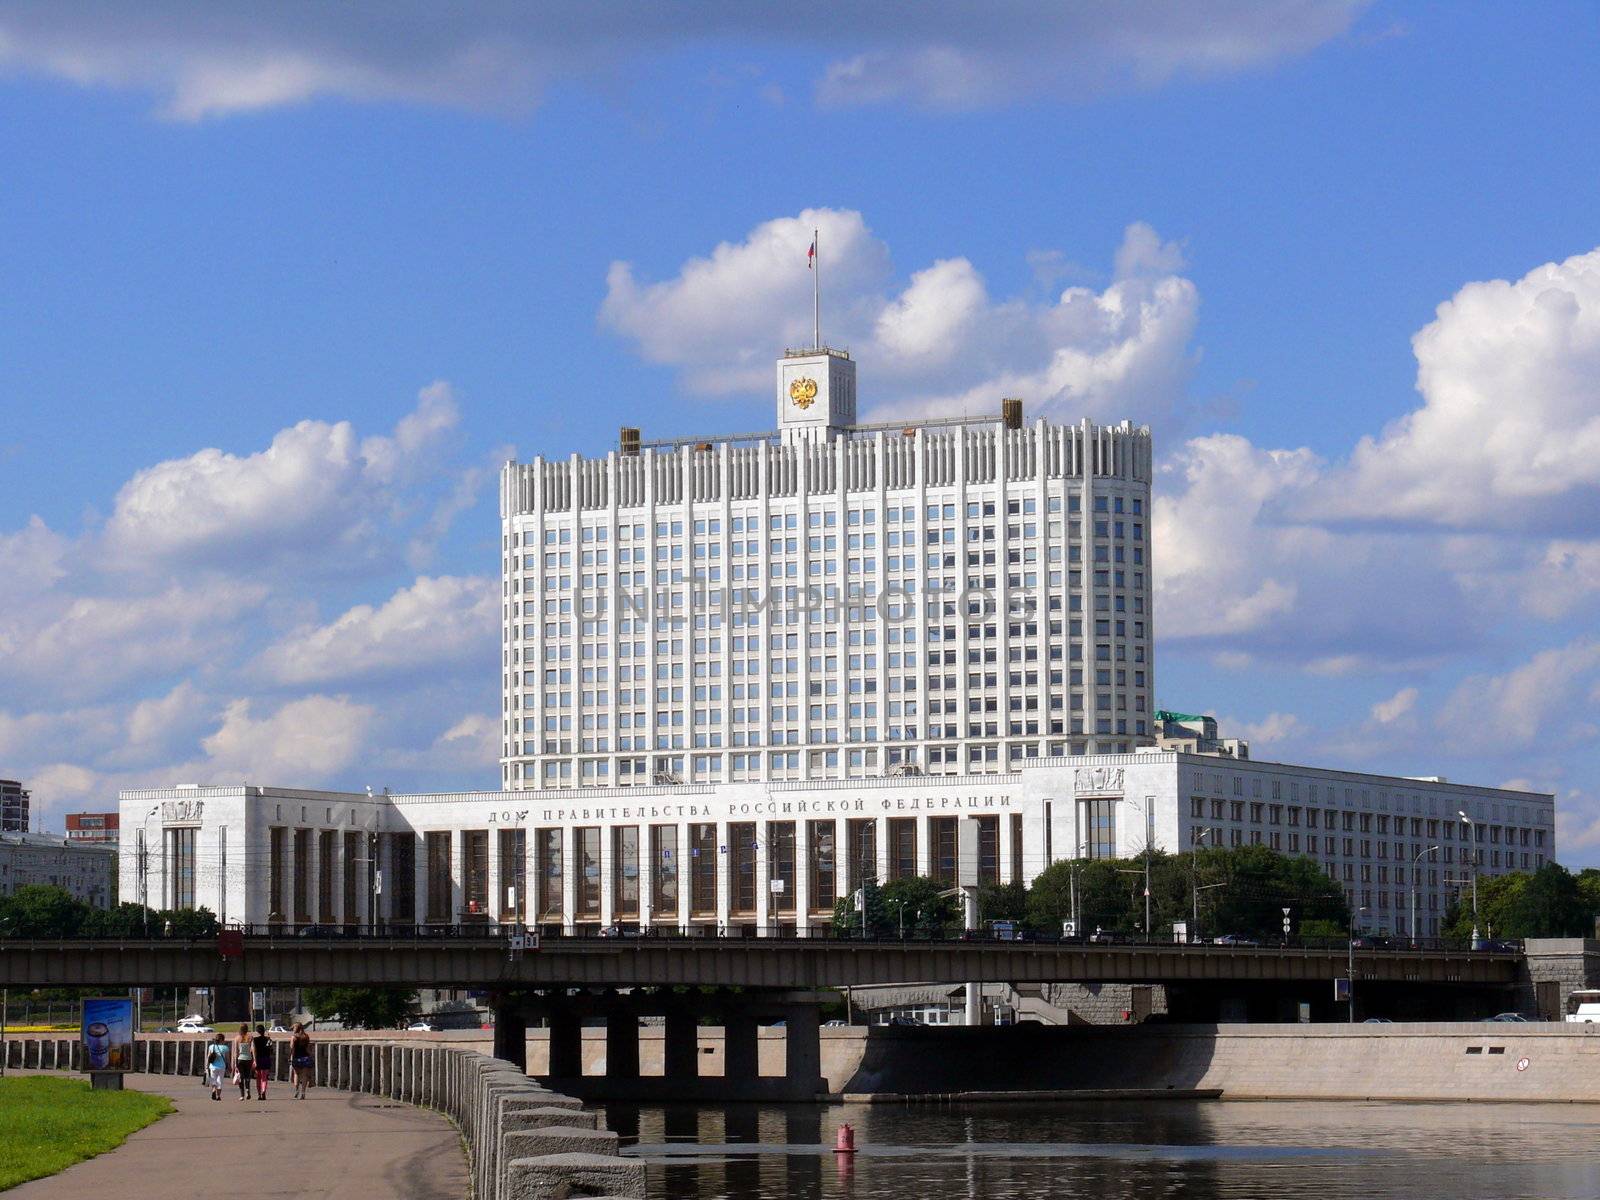 House of government of Russian Federation by Stoyanov